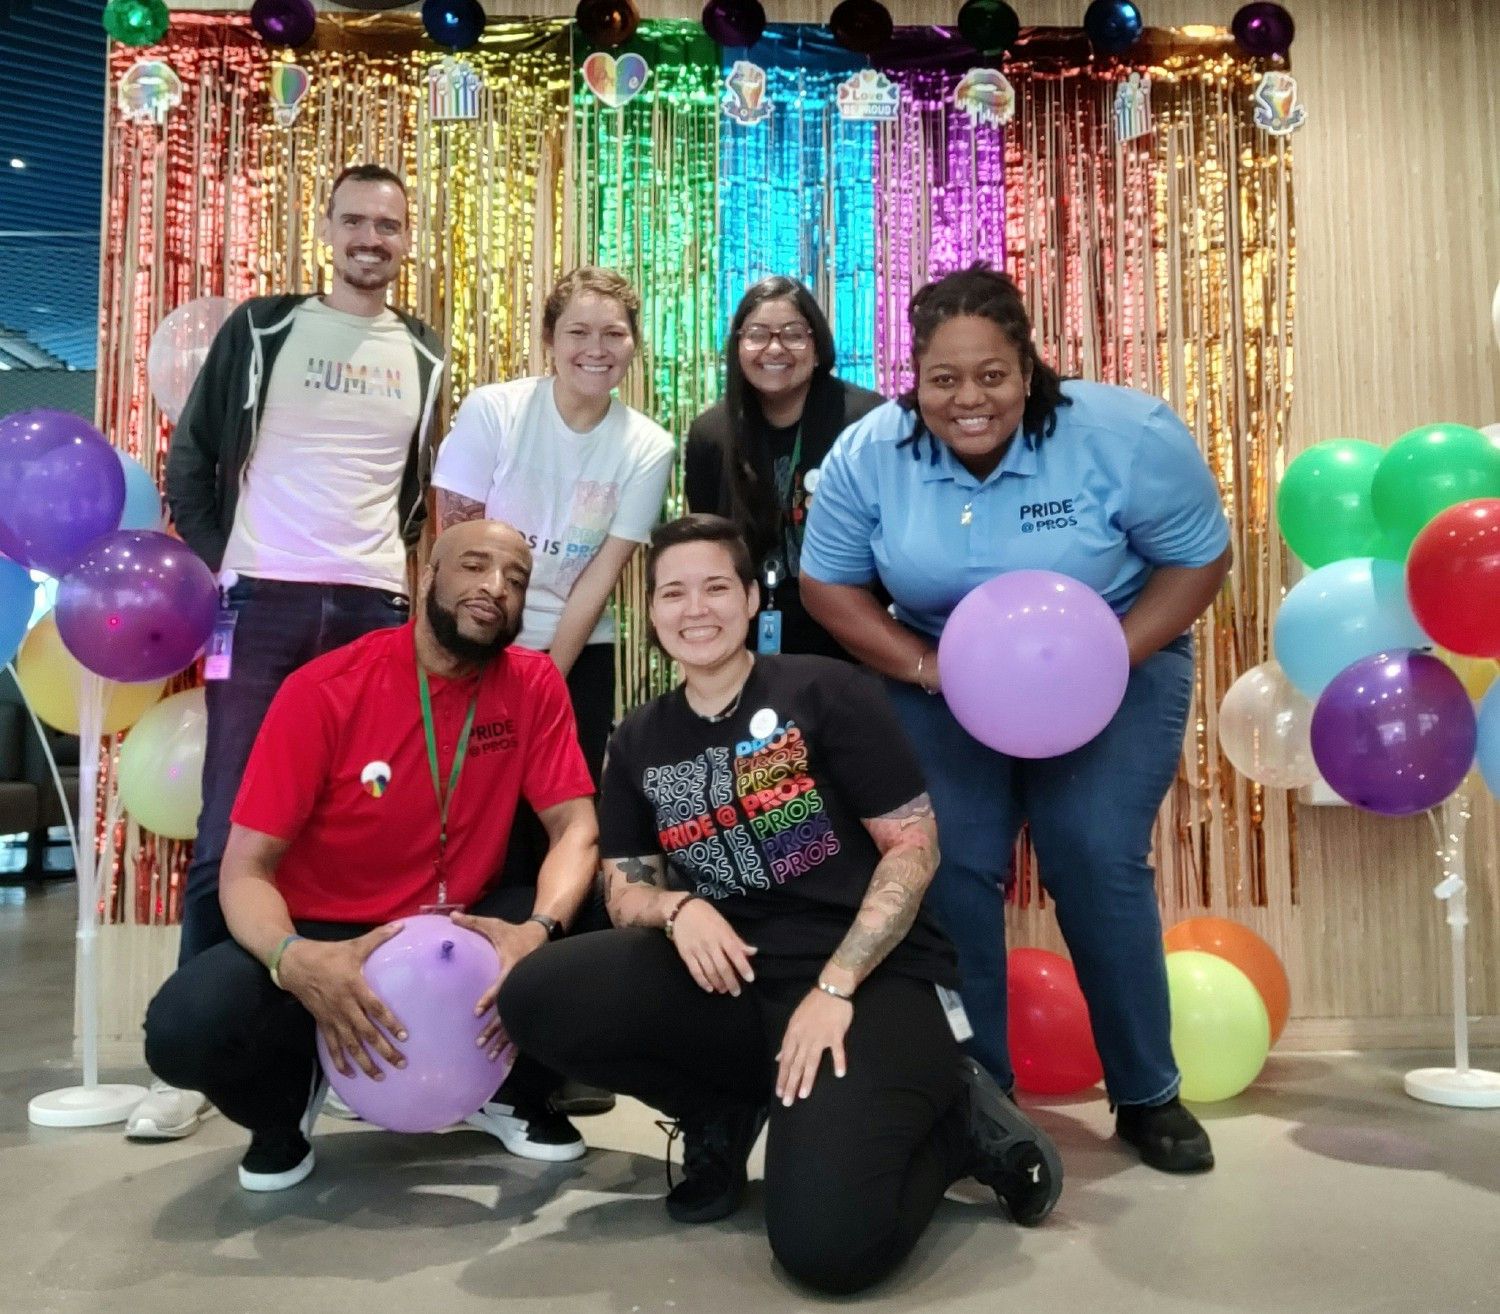 PRIDE, one of our six Employee Resource Groups at PROS, fosters a positive environment for our LGBTQIA+ and Ally members